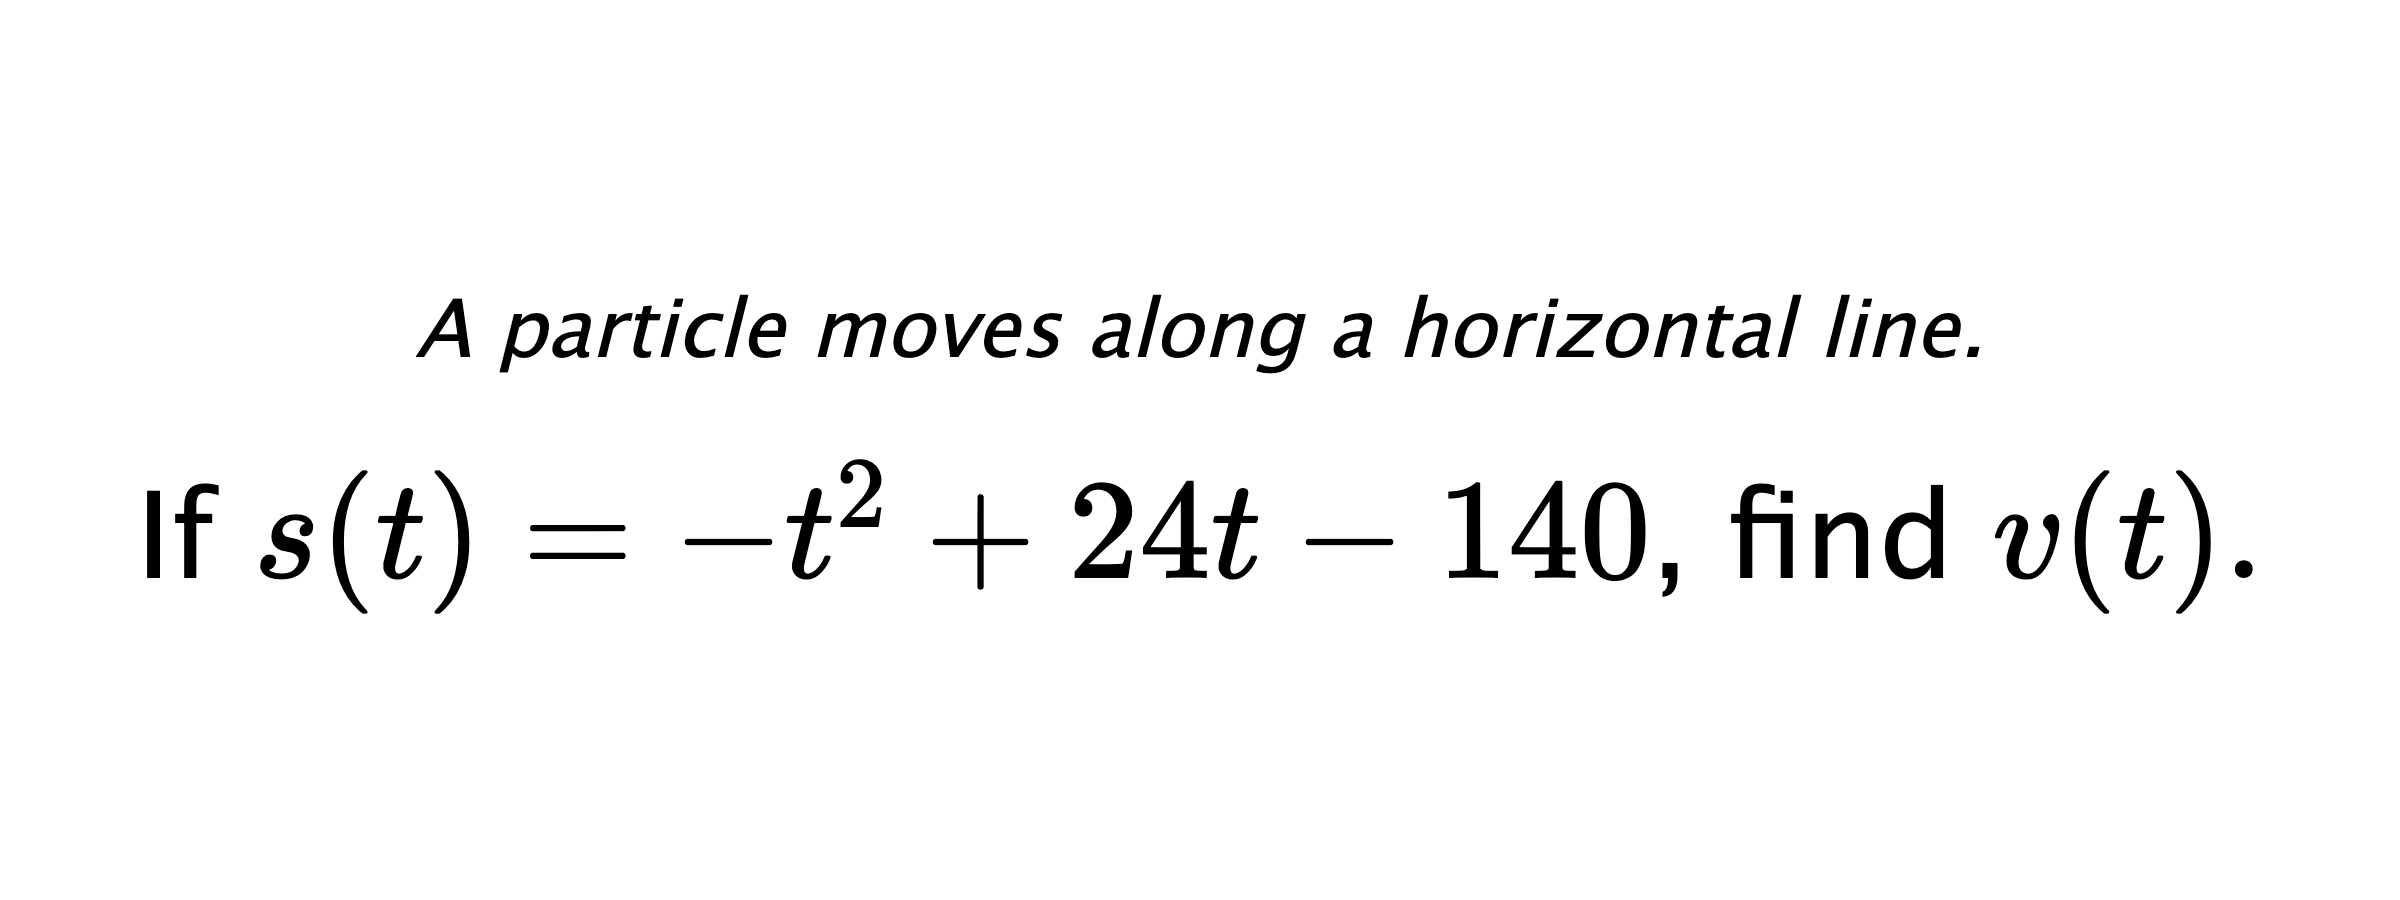 A particle moves along a horizontal line. If $ s(t)=-t^2+24t-140 $, find $ v(t). $